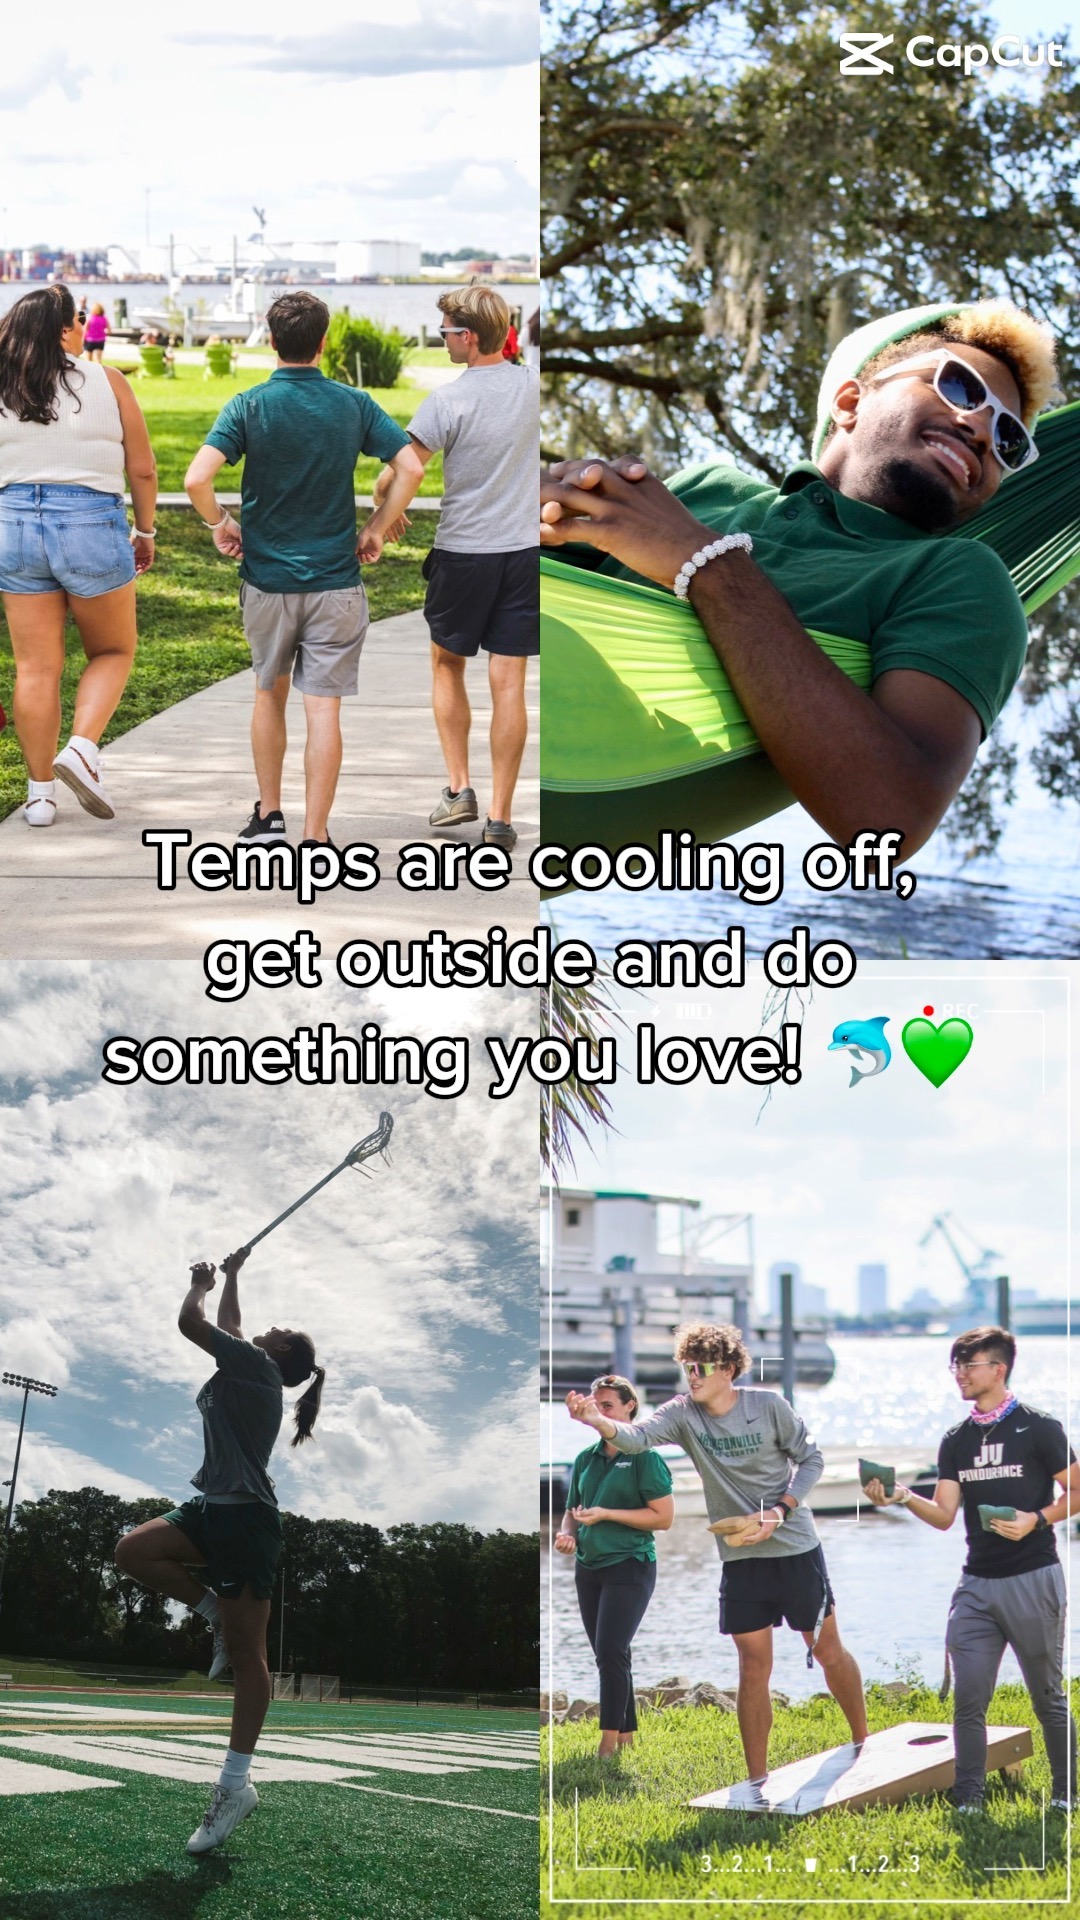 Temps are cooling off, get outside and do something you love! 💚🐬 #juphinsup